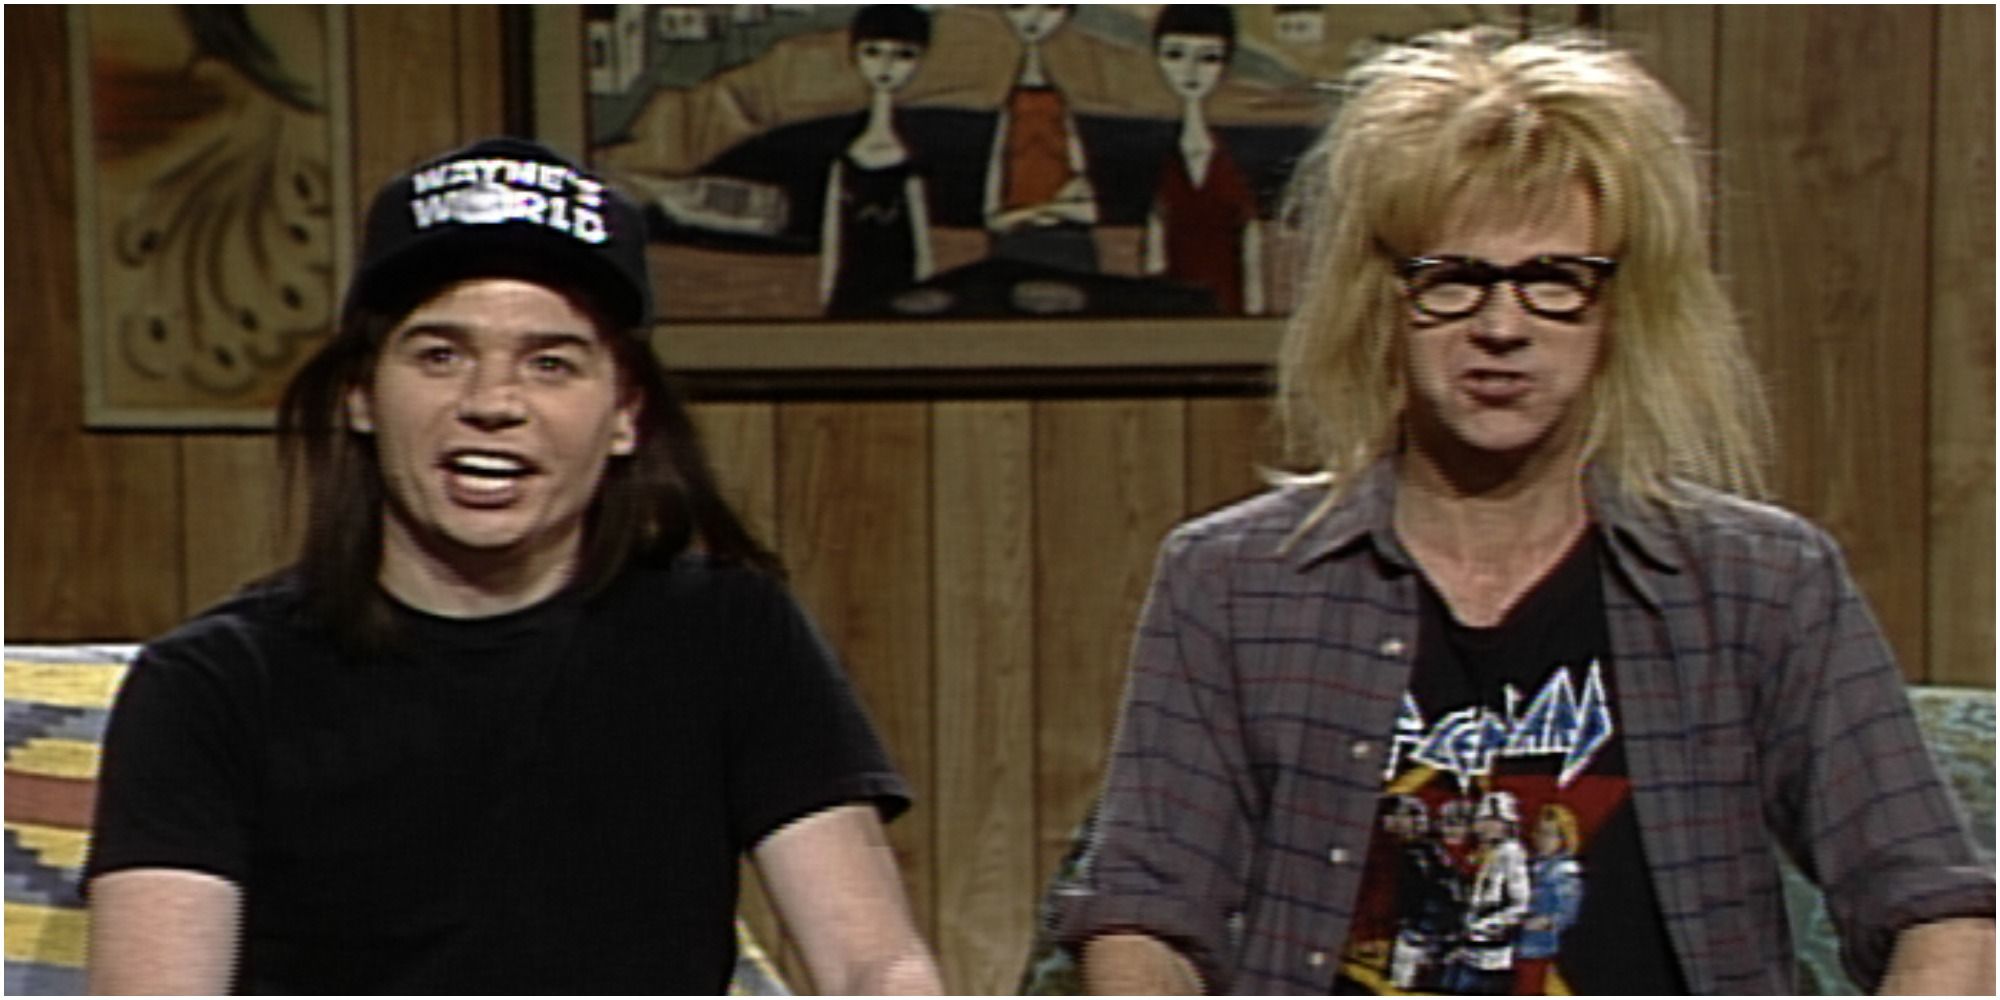 A screenshot of Wayne Campbell and Garth Algar during their show from Saturday Night Live